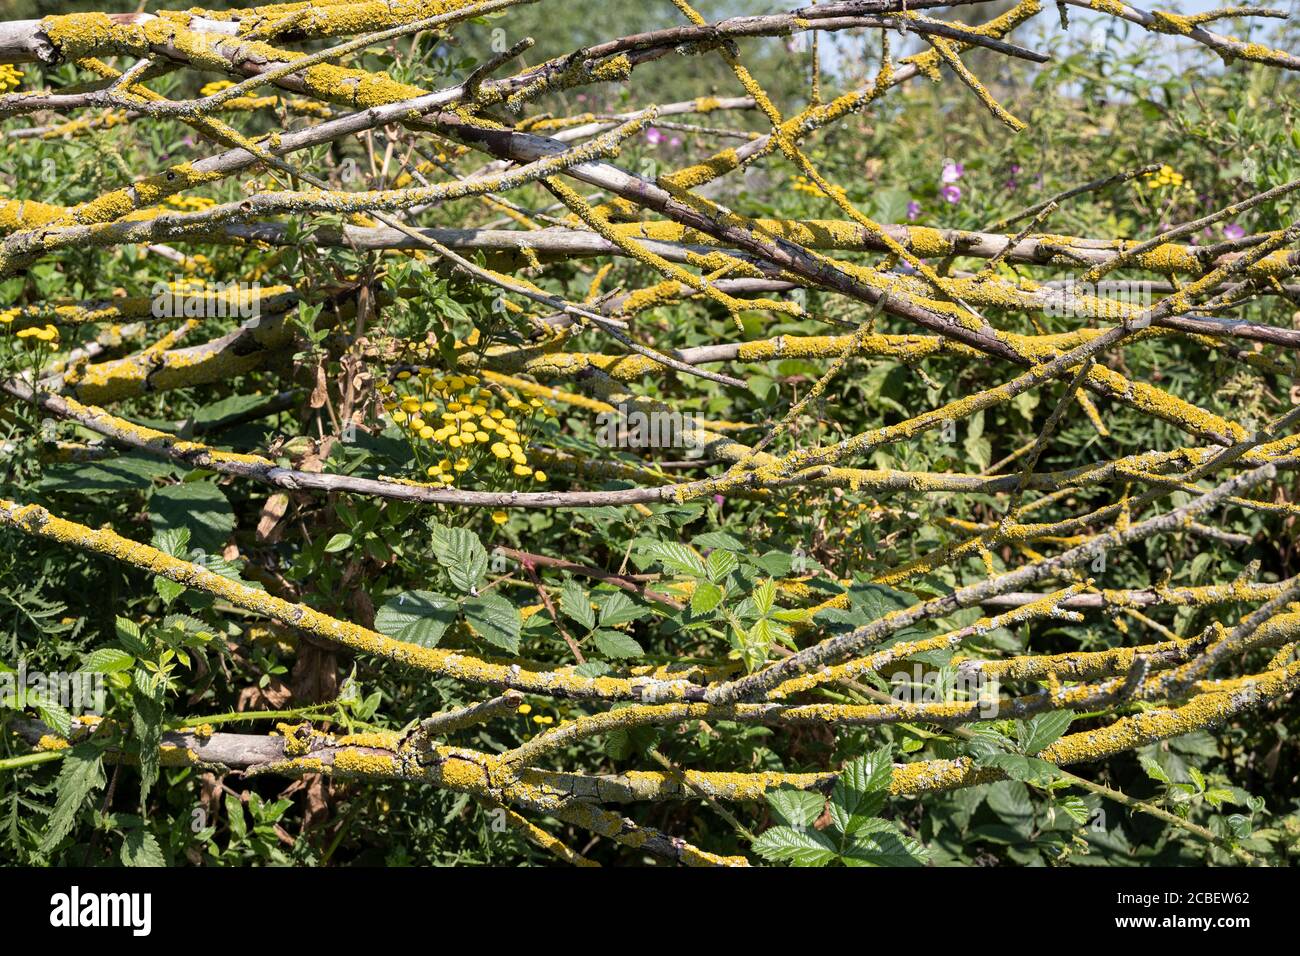 Yellow crustose lichens on hedgerow branches Stock Photo